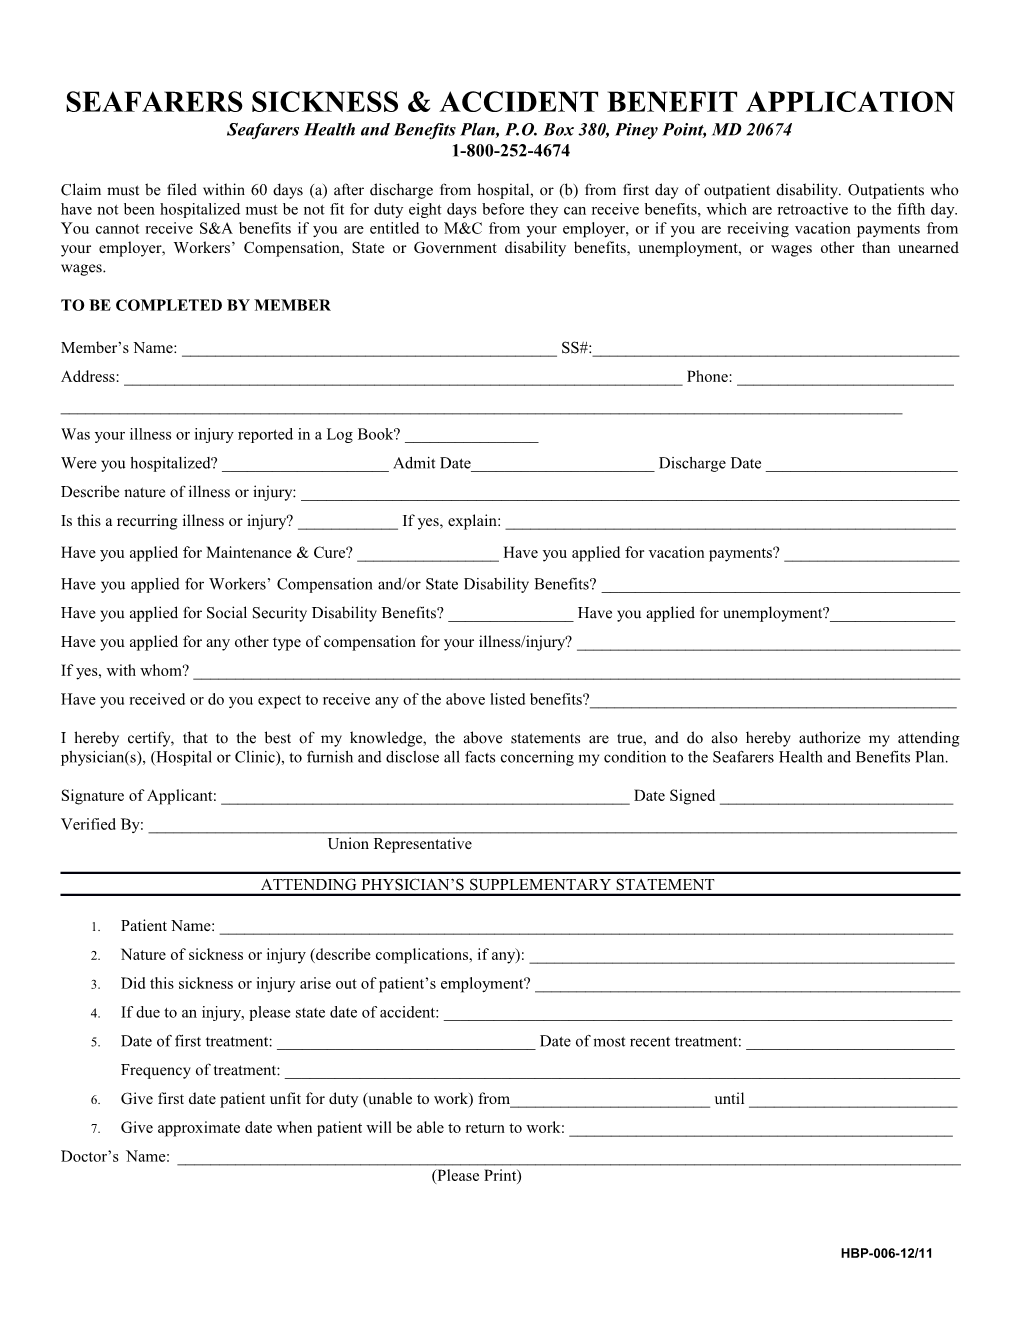 Seafarers Sickness & Accident Benefit Application